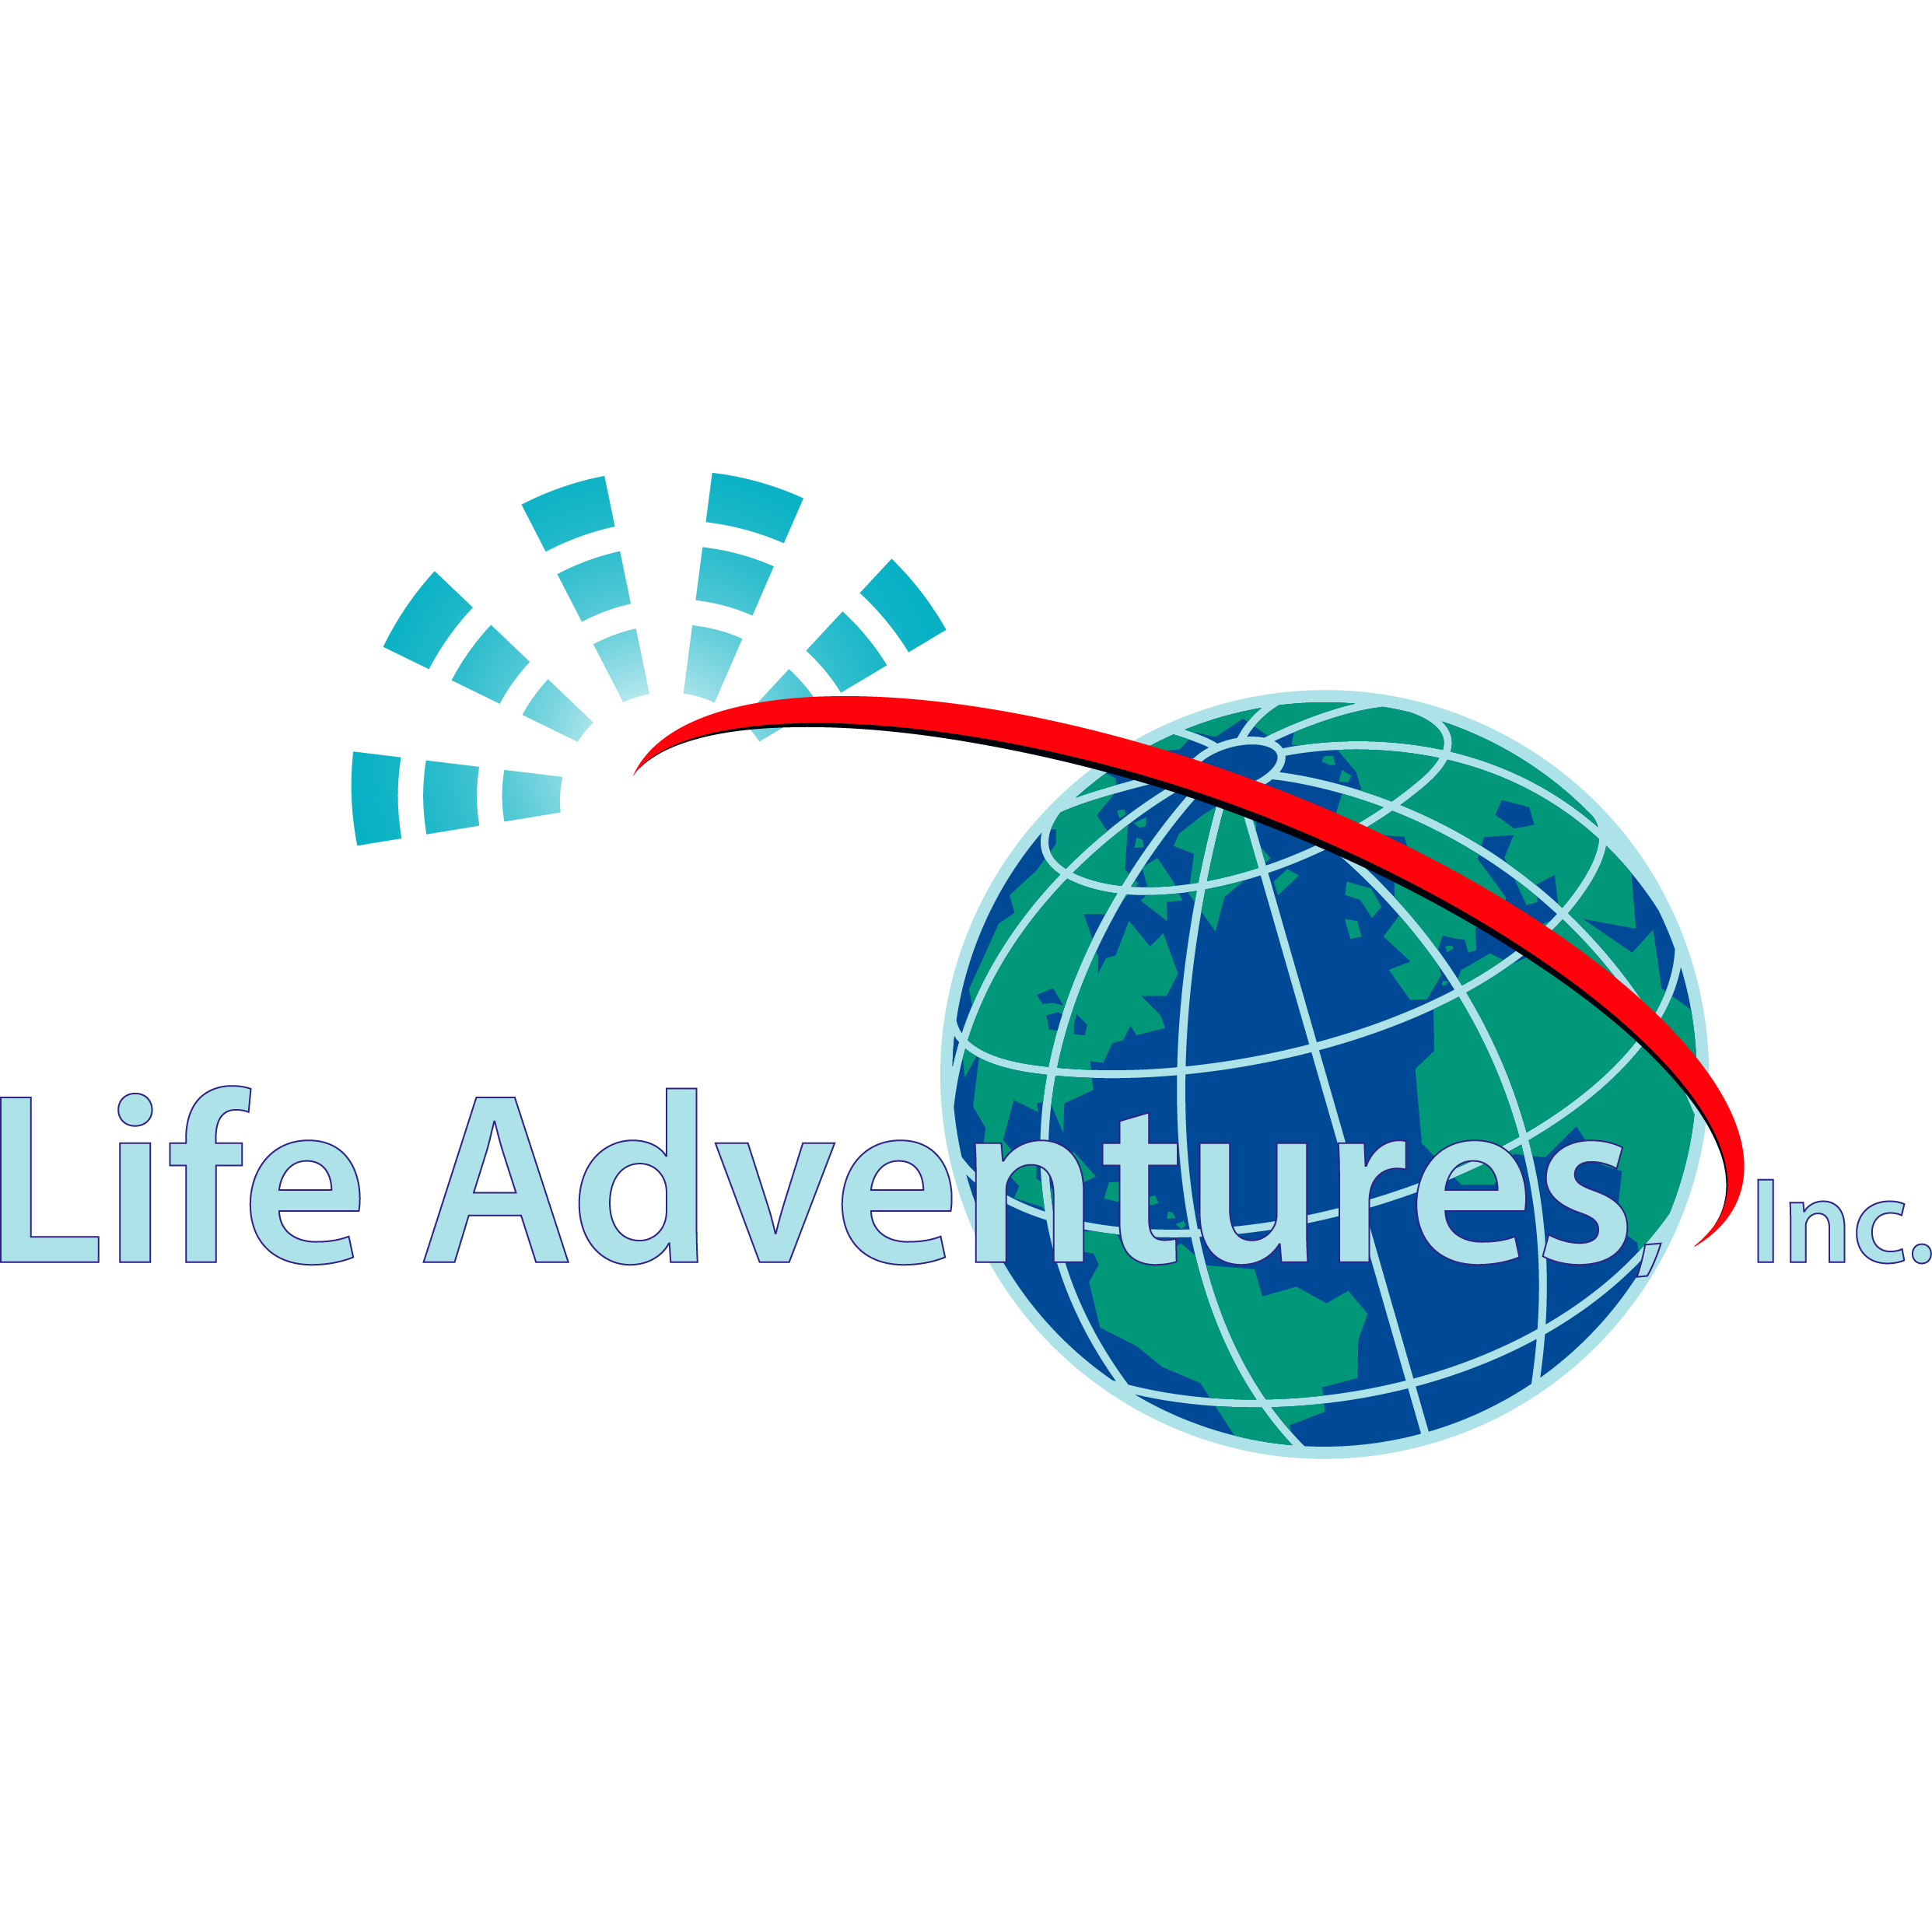 Life Adventures is a J-1 Visa sponsor. We provide the opportunity to work and travel in the US for up to 4 months during summer break.